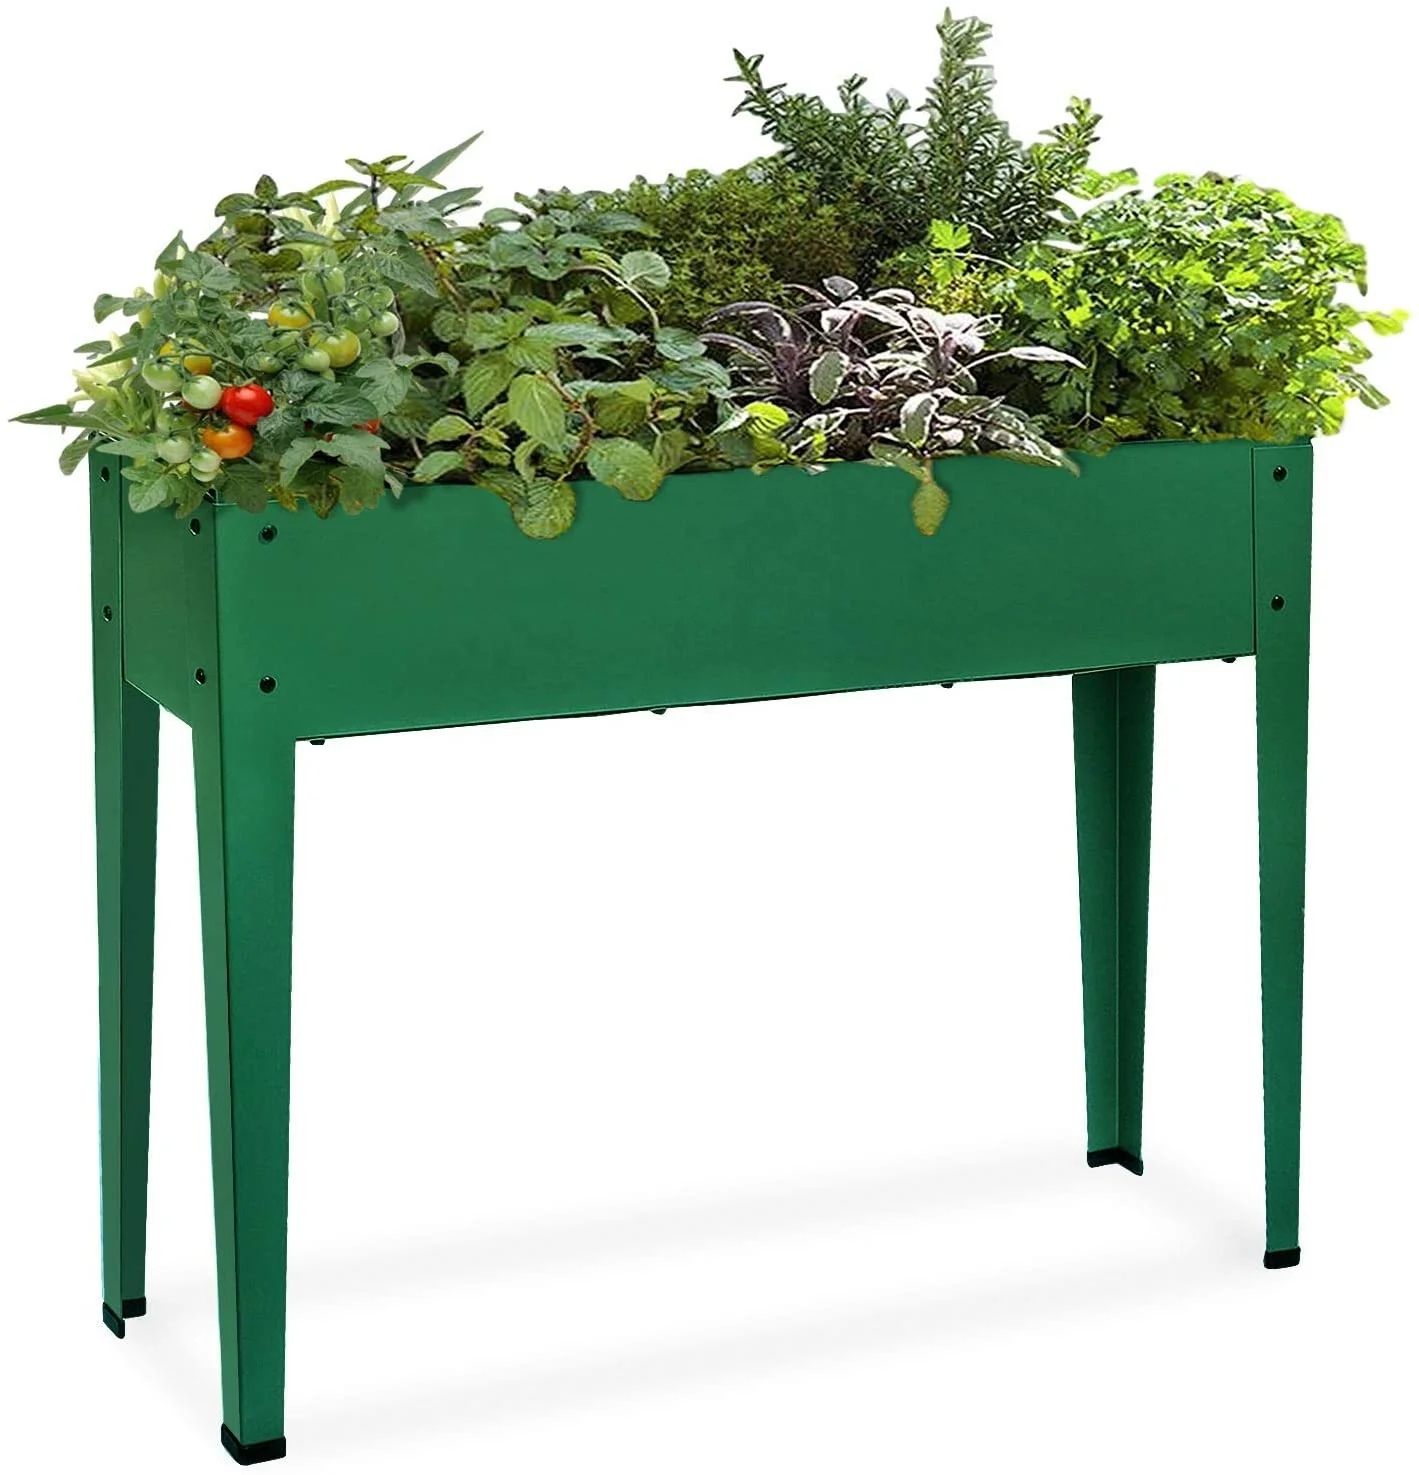 FOYUEE Raised Planter Box with Legs Outdoor Elevated Garden Bed On Wheels for Vegetables Flower Herb Patio